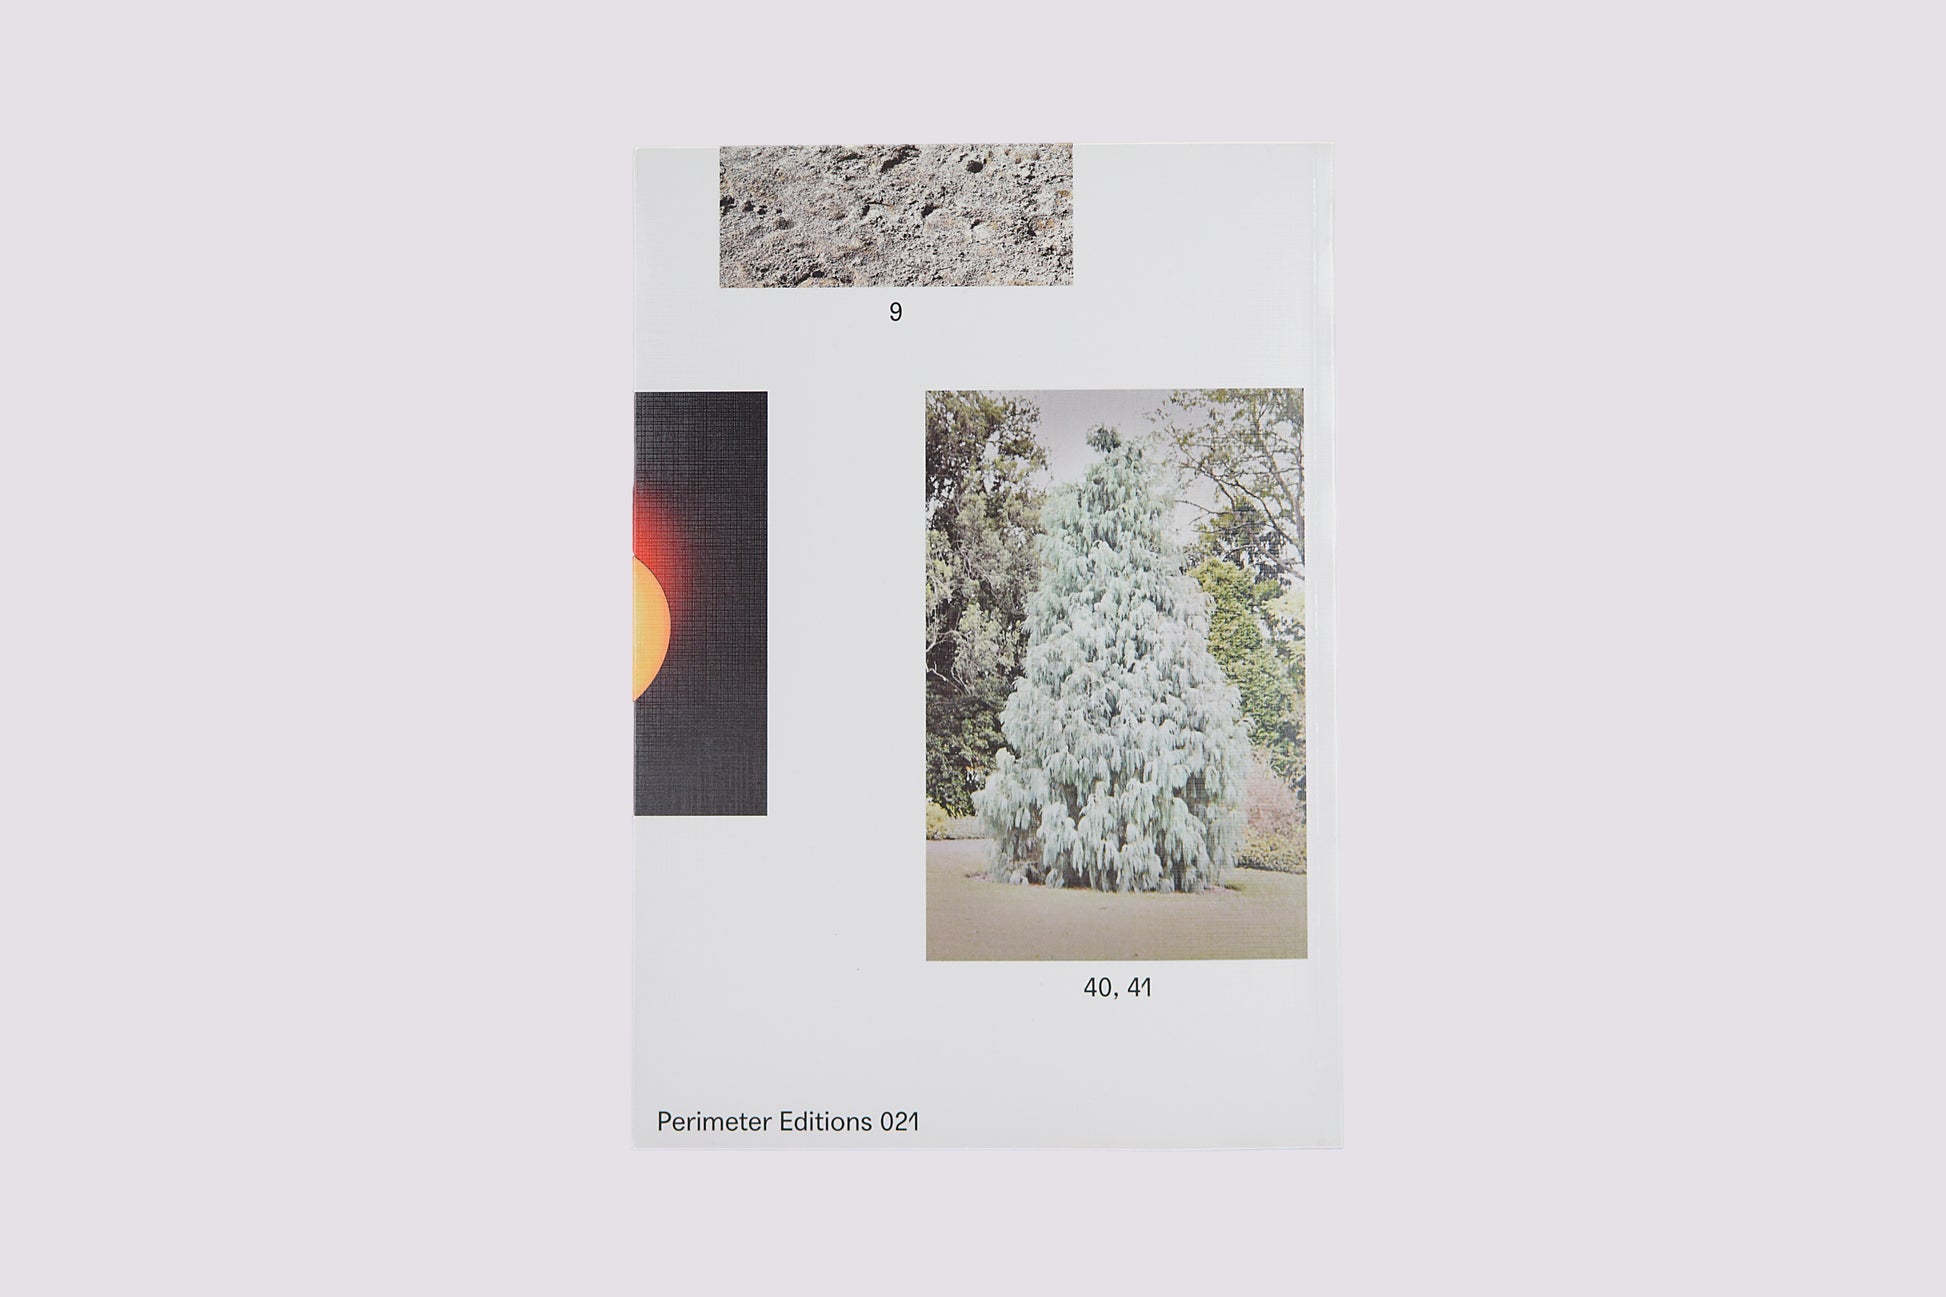 Family Photos/Eliza Hutchison by Perimeter Editions